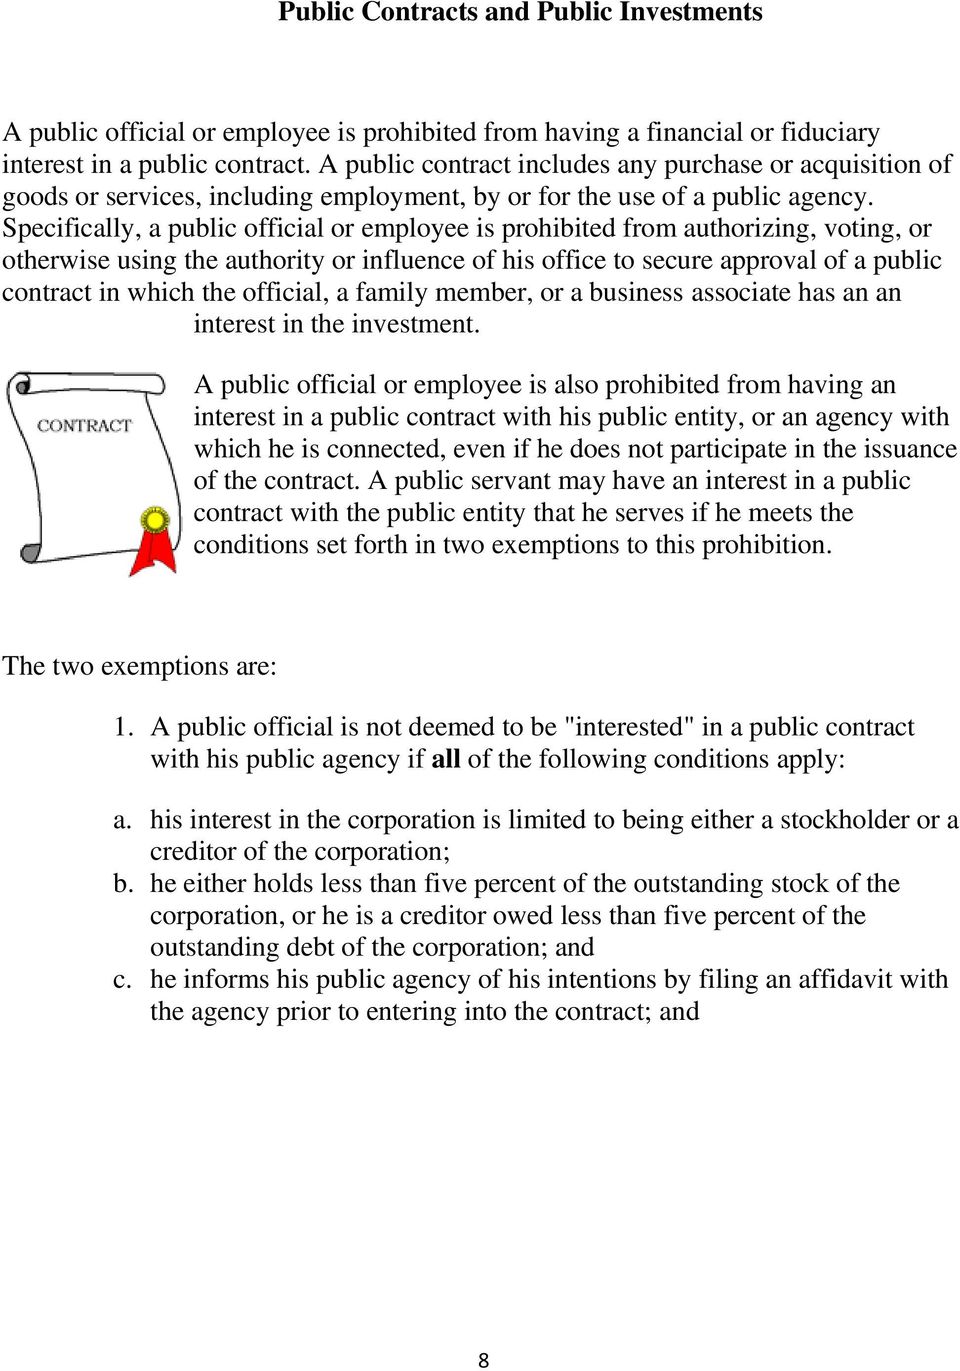 Specifically, a public official or employee is prohibited from authorizing, voting, or otherwise using the authority or influence of his office to secure approval of a public contract in which the